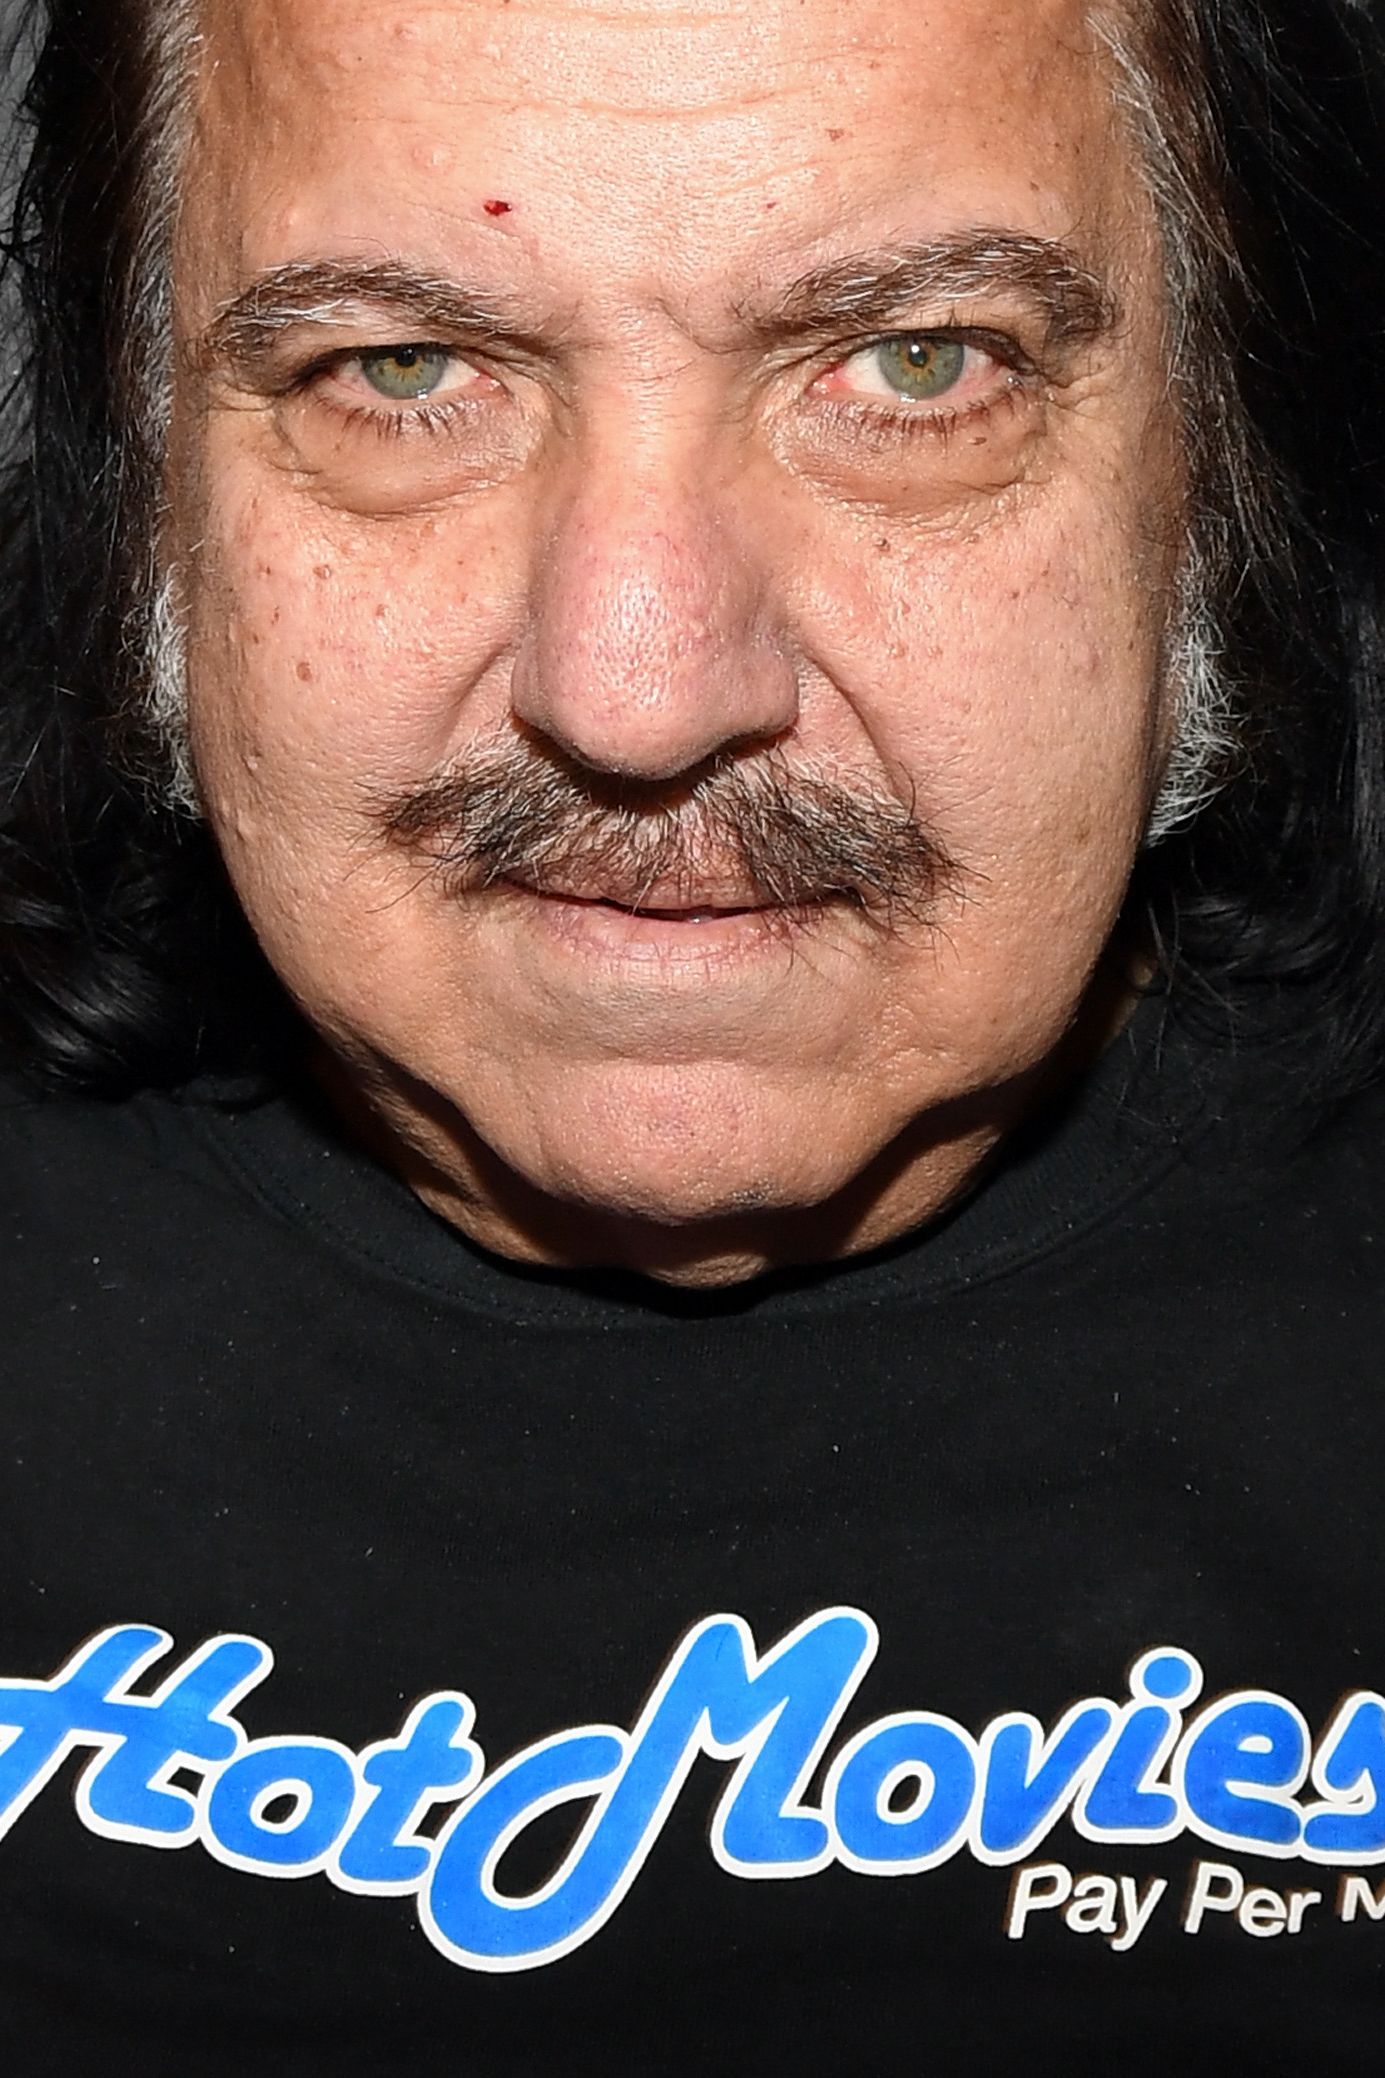 Xxx Russian Girls Forced - Ron Jeremy, porn star, charged with sexually assaulting four women | CNN